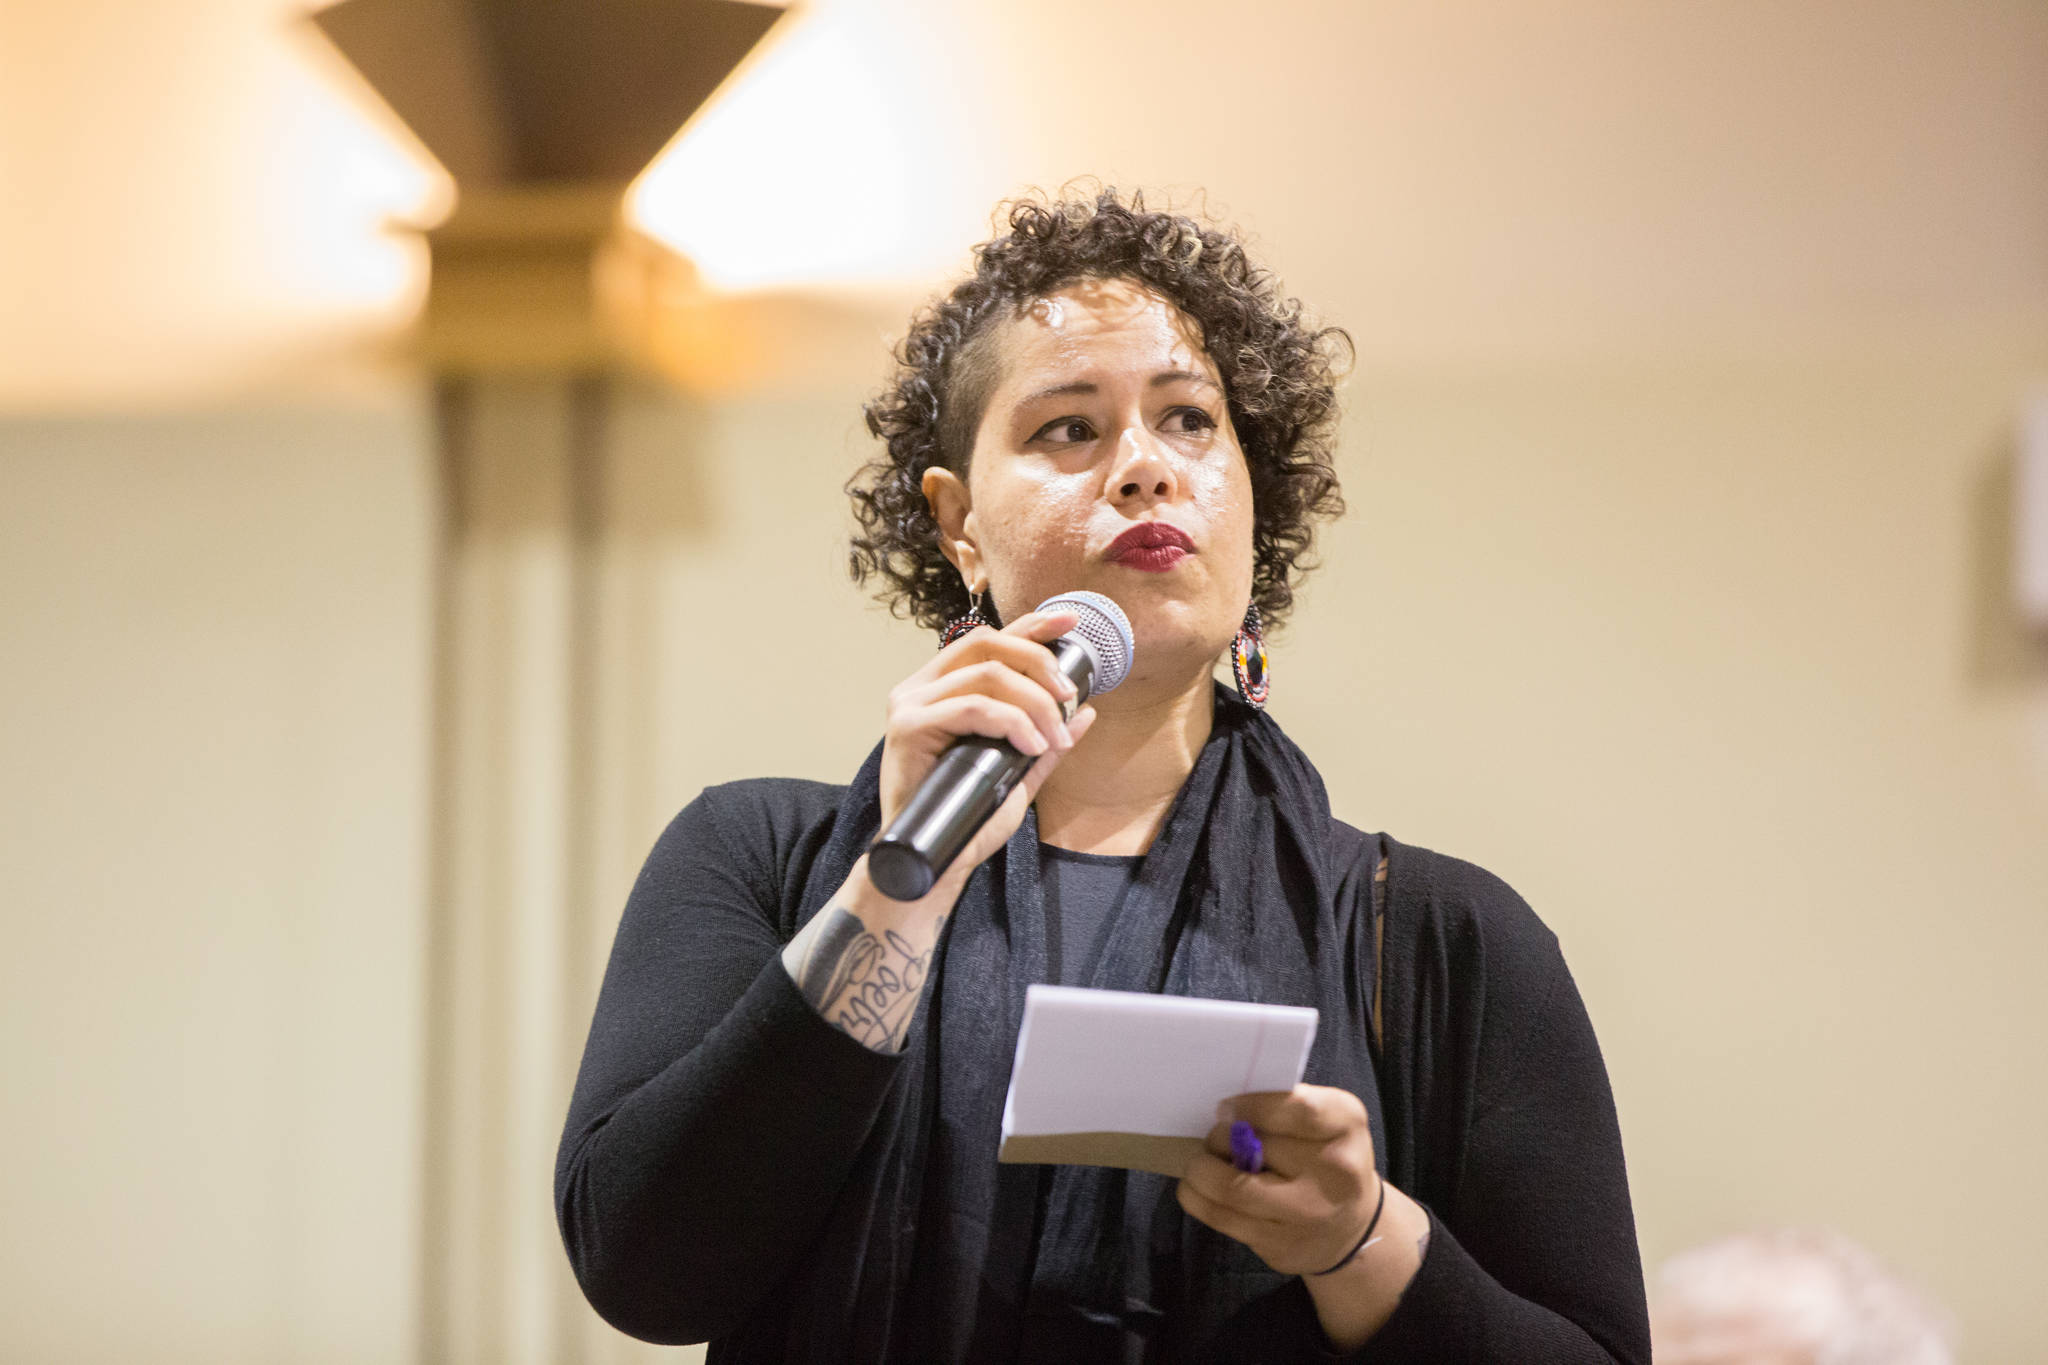 Nikkita Oliver was one of six candidates to declare before allegations against Ed Murray came to light. Photo by Alex Garland.